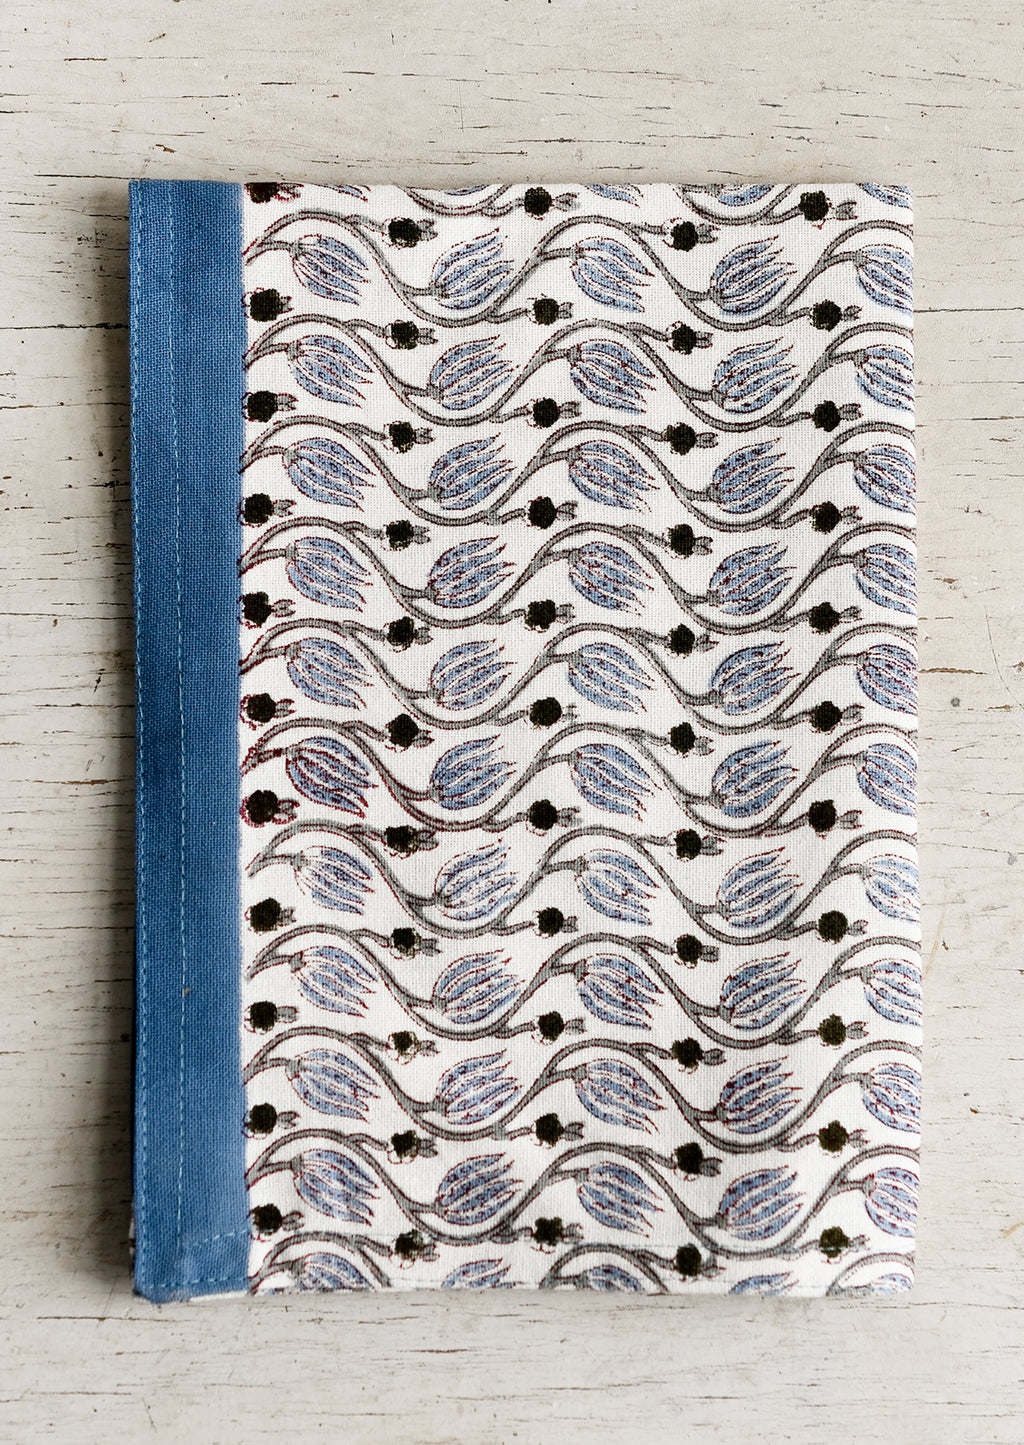 Dusty Blue Multi: A tea towel with dusty blue print and trim.